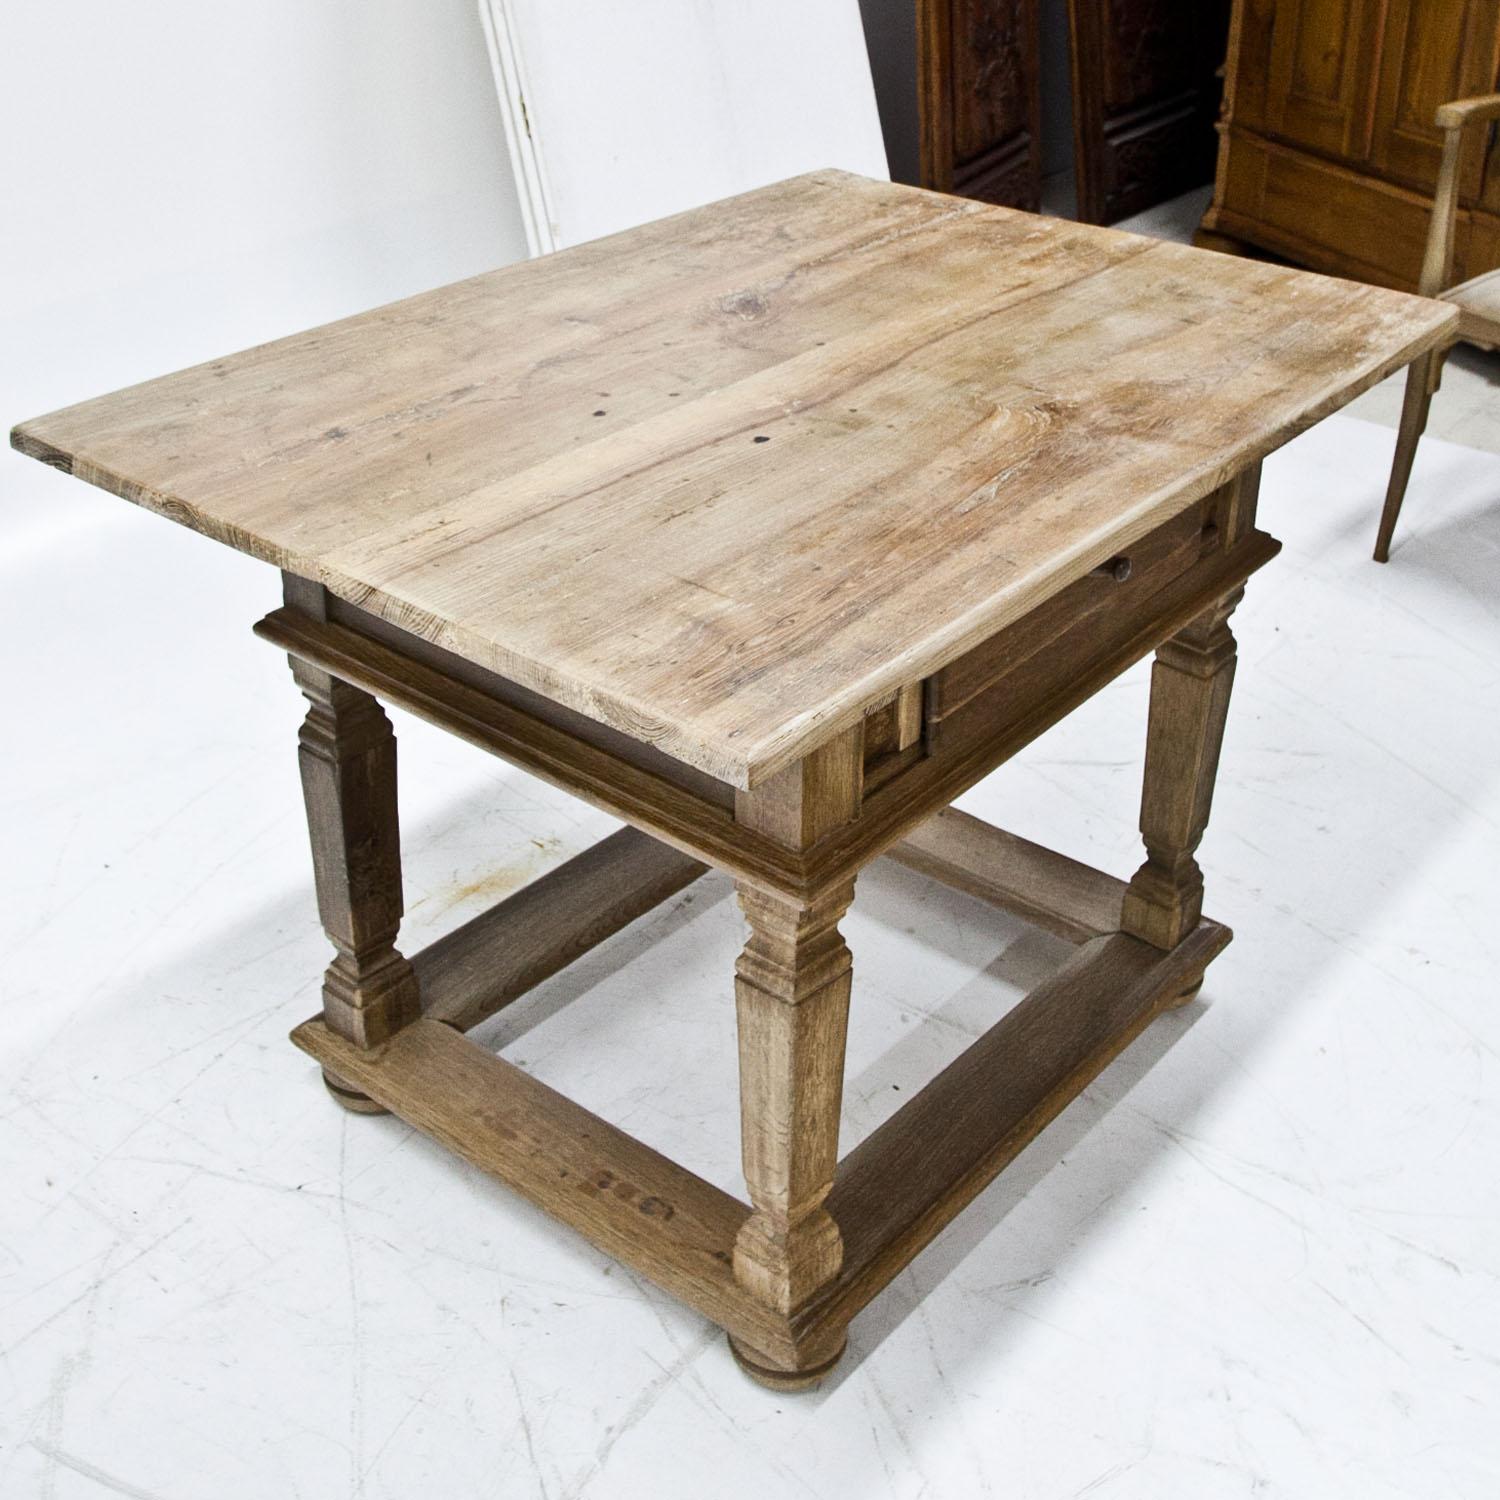 Franconian table with one drawer on profiled legs with strutting in between.